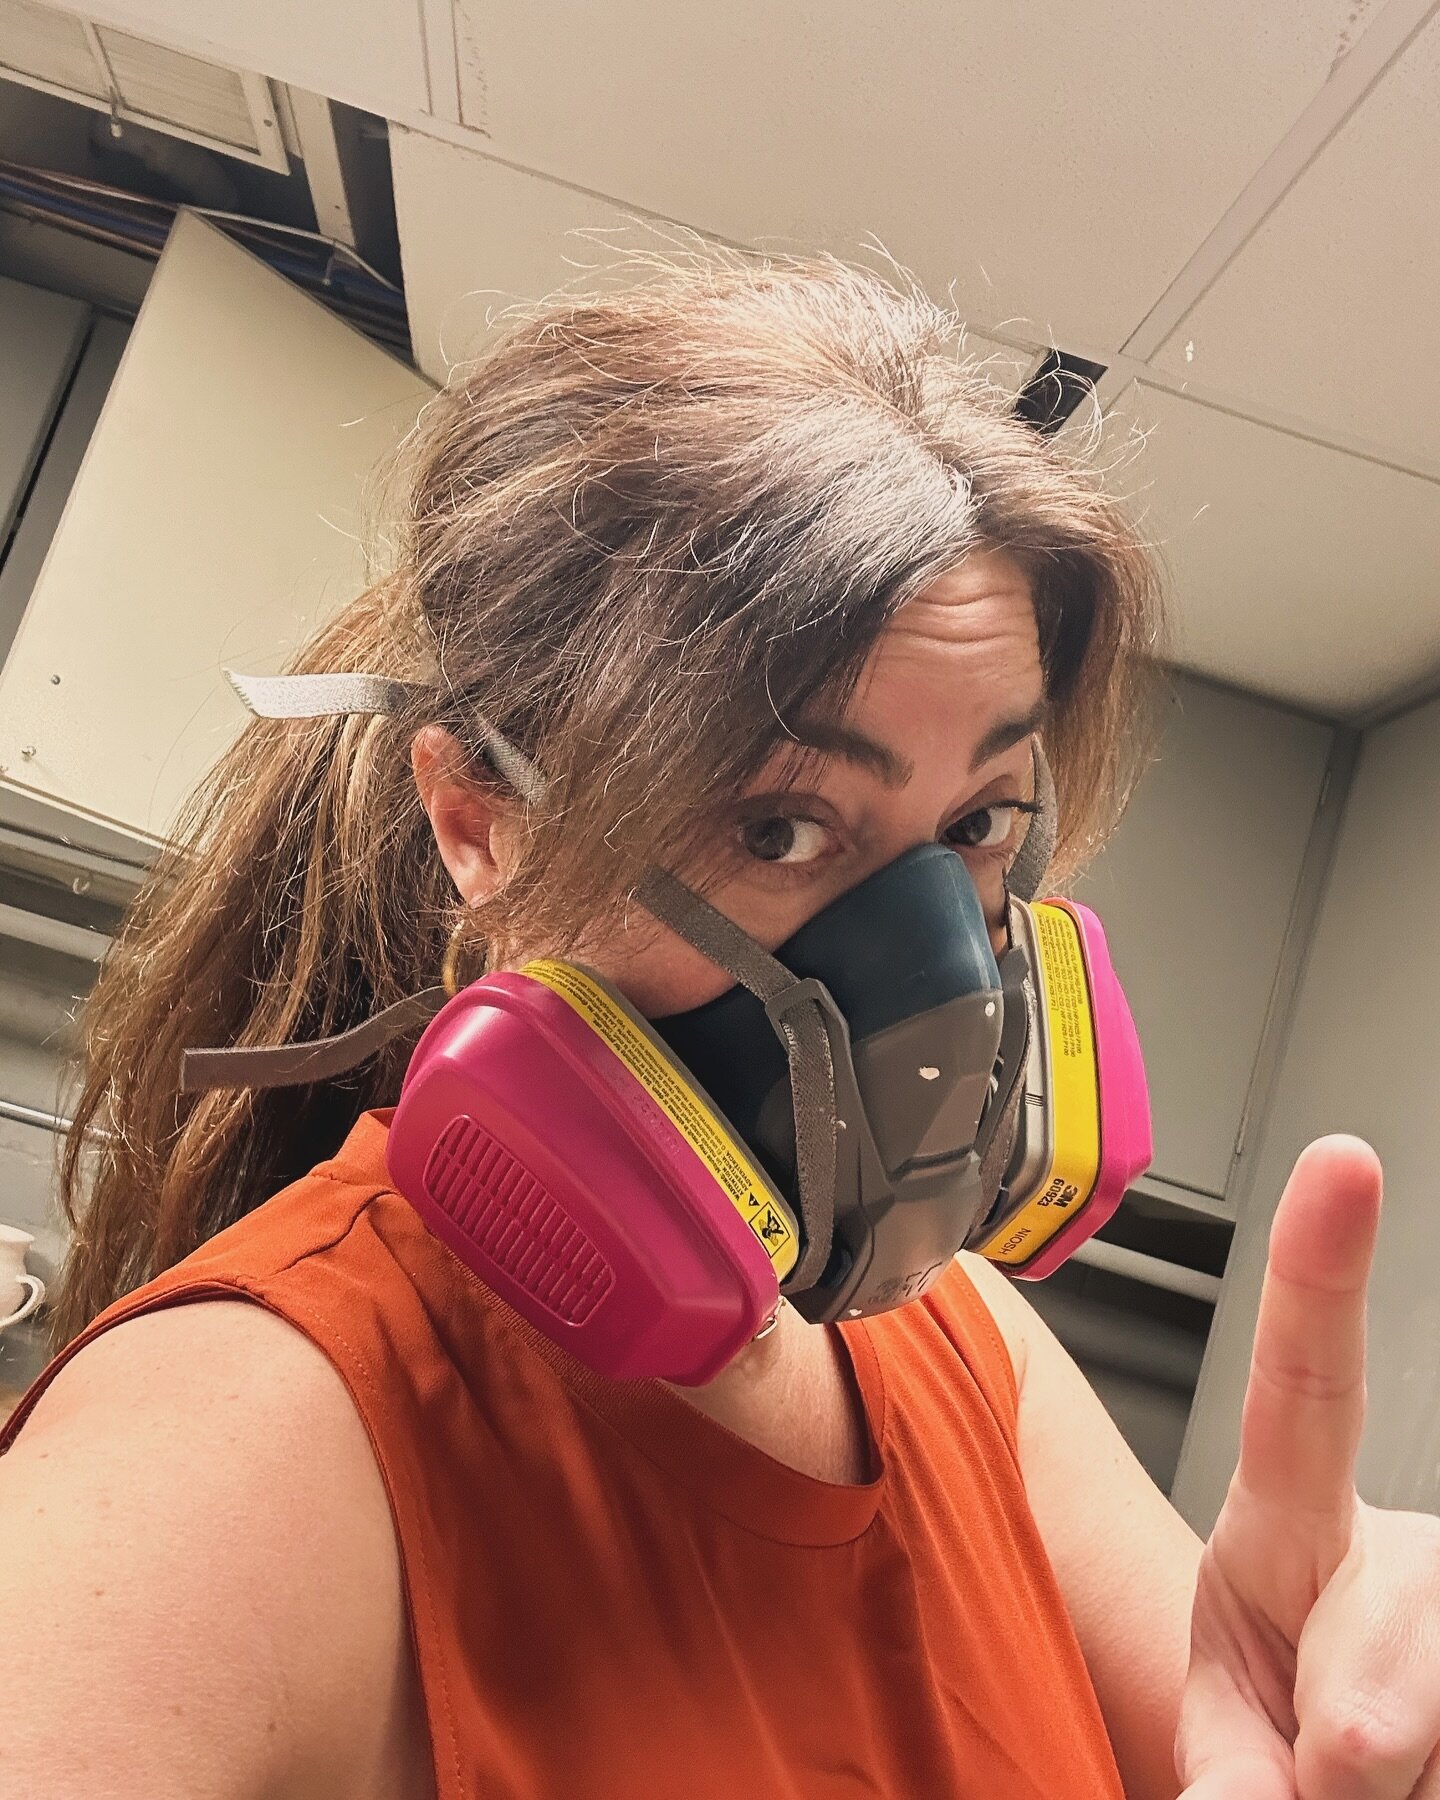 Safety first&hellip; let&rsquo;s attempt to mix my own glaze from scratch. If you have ever worked with commercial glazes they get super expensive quickly&hellip; so I&rsquo;d figure why not use my masters degree in genetics toward this hobby a bit. 